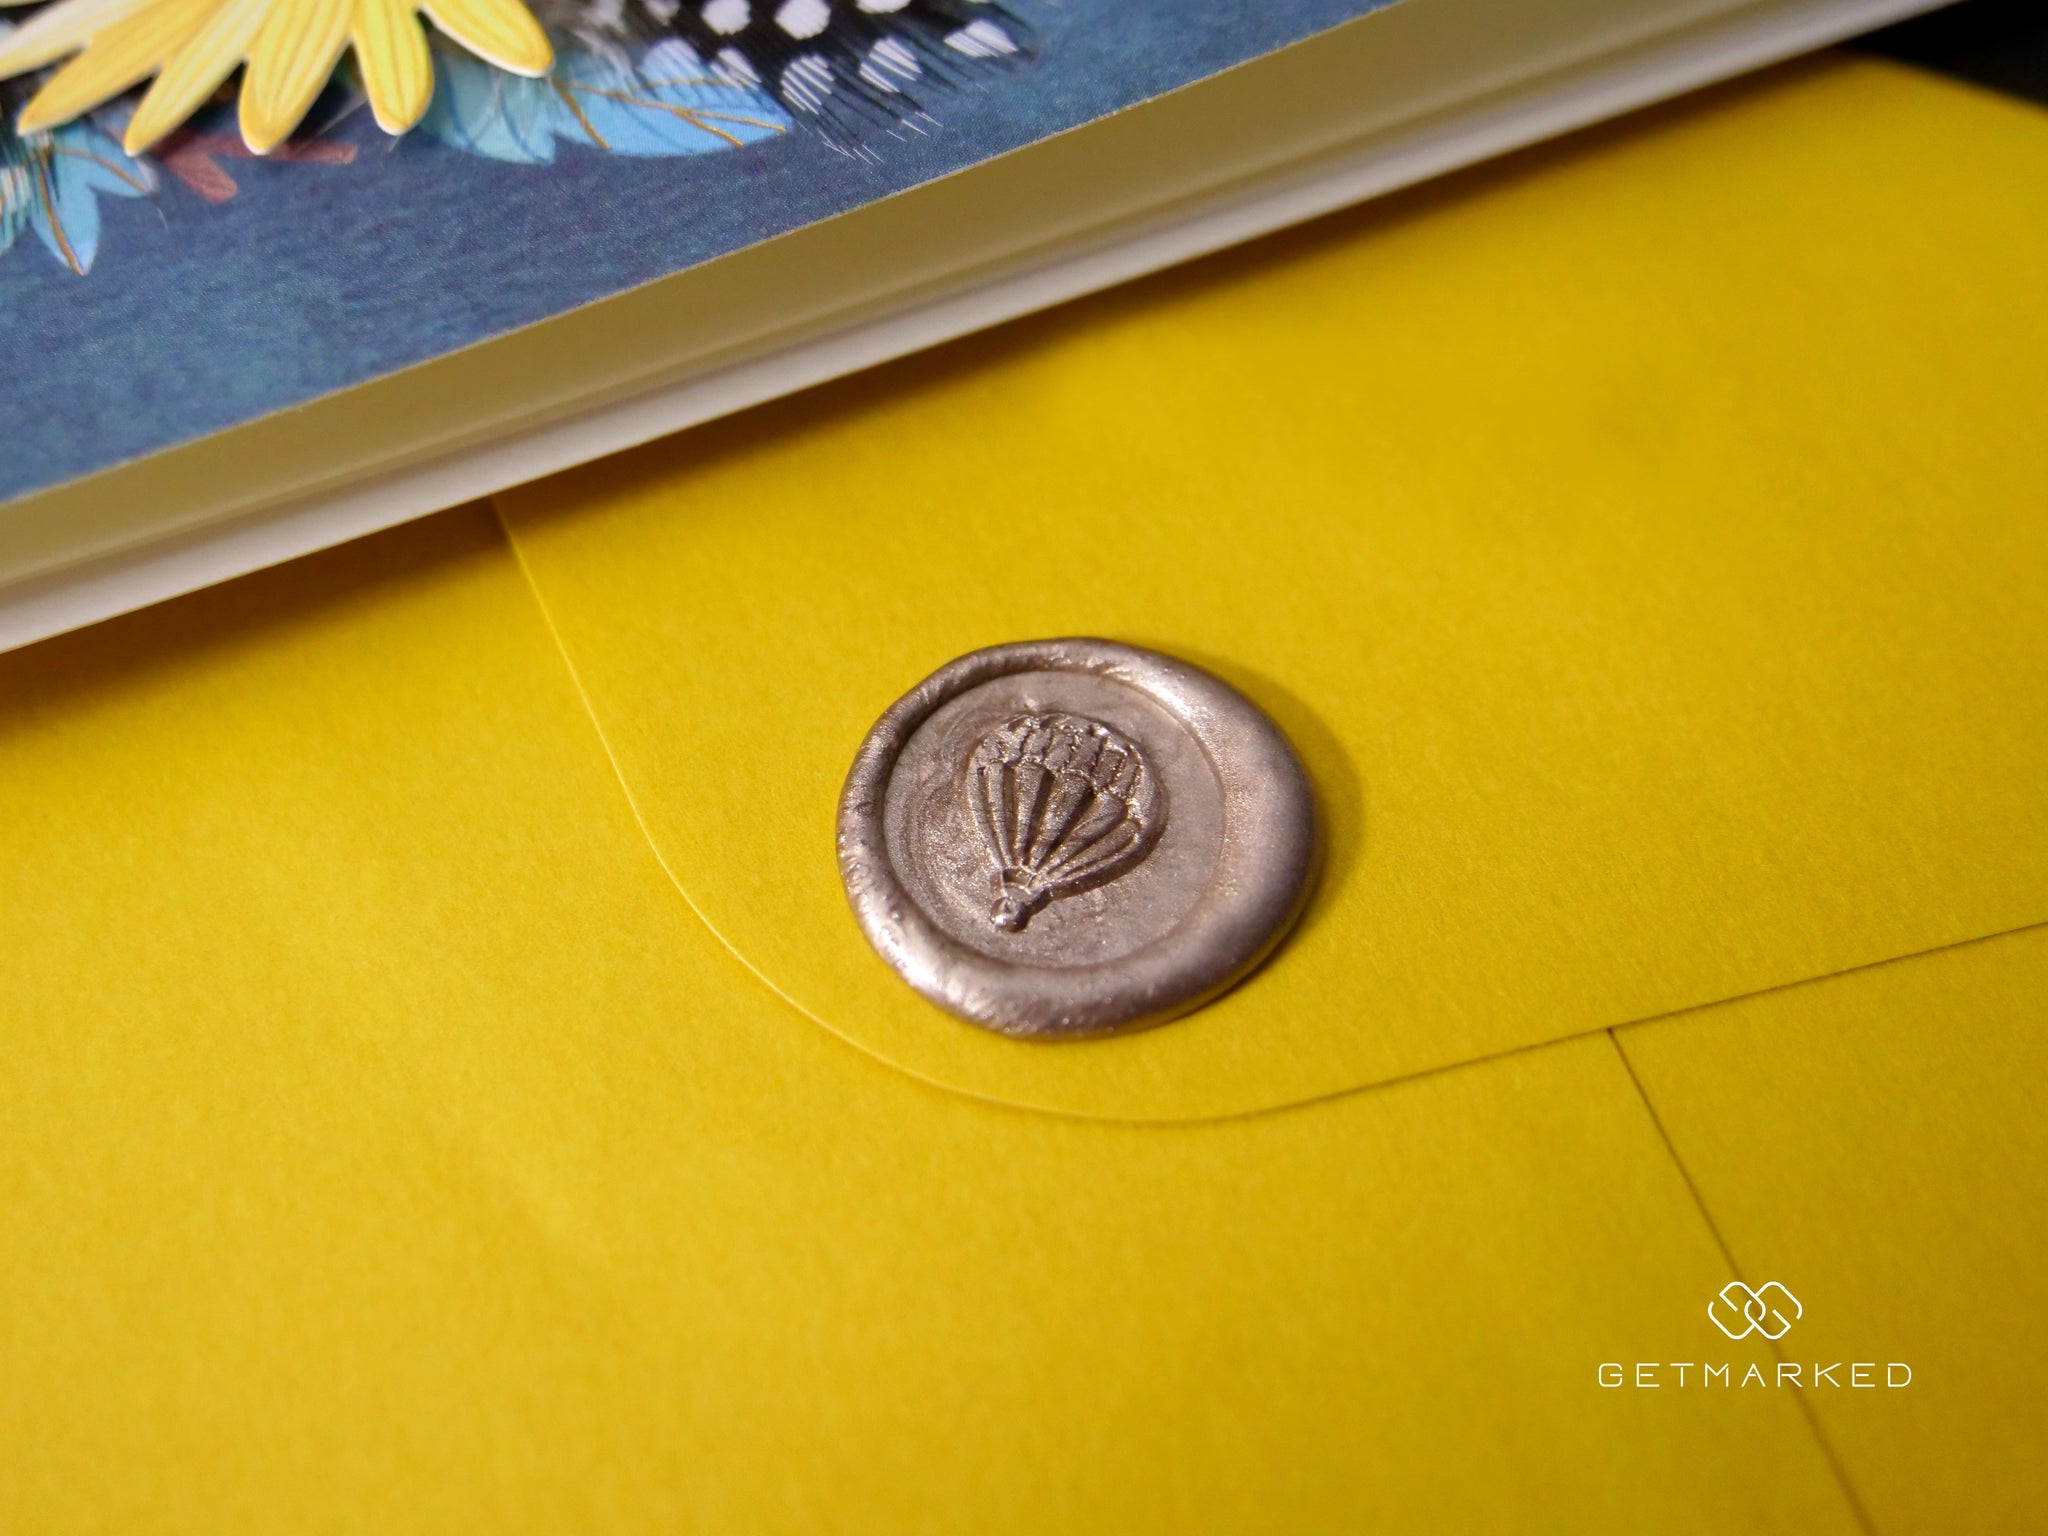 Customized Wax Stamps - GetMarked™ • Wax Seals & Stamping Goods HQ •